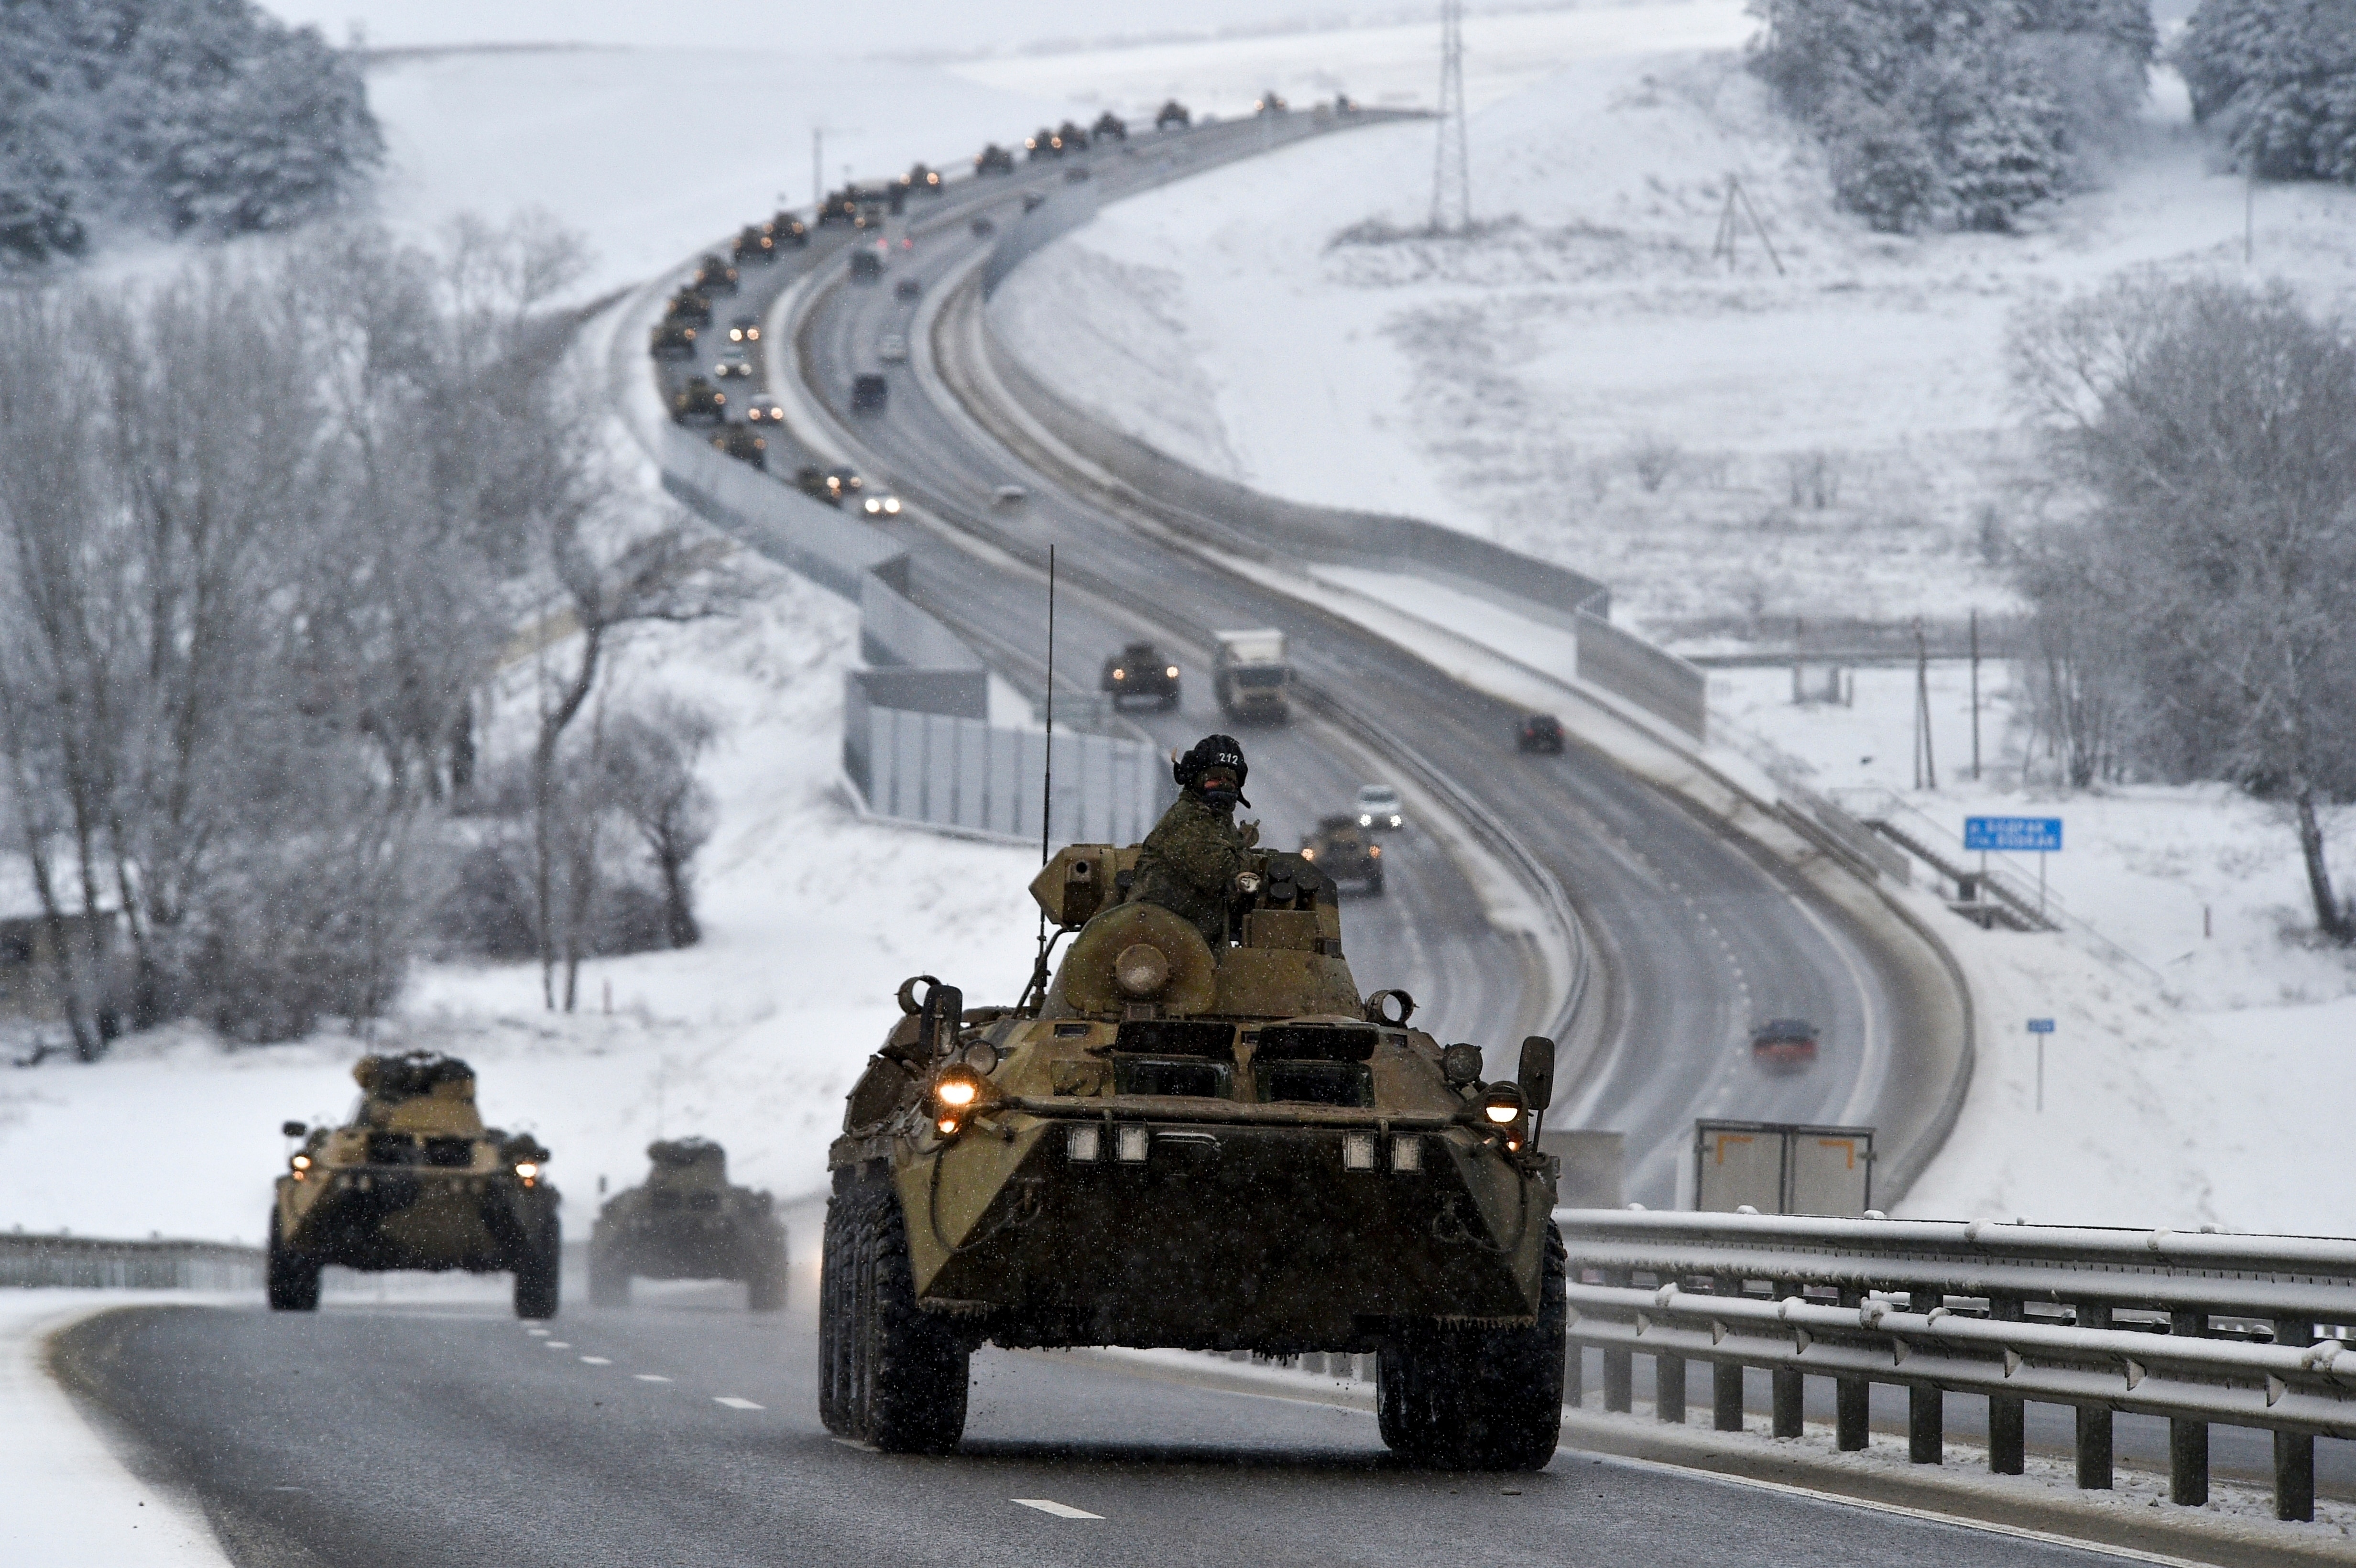 Tens of thousands of Russian troops are positioned near Ukraine